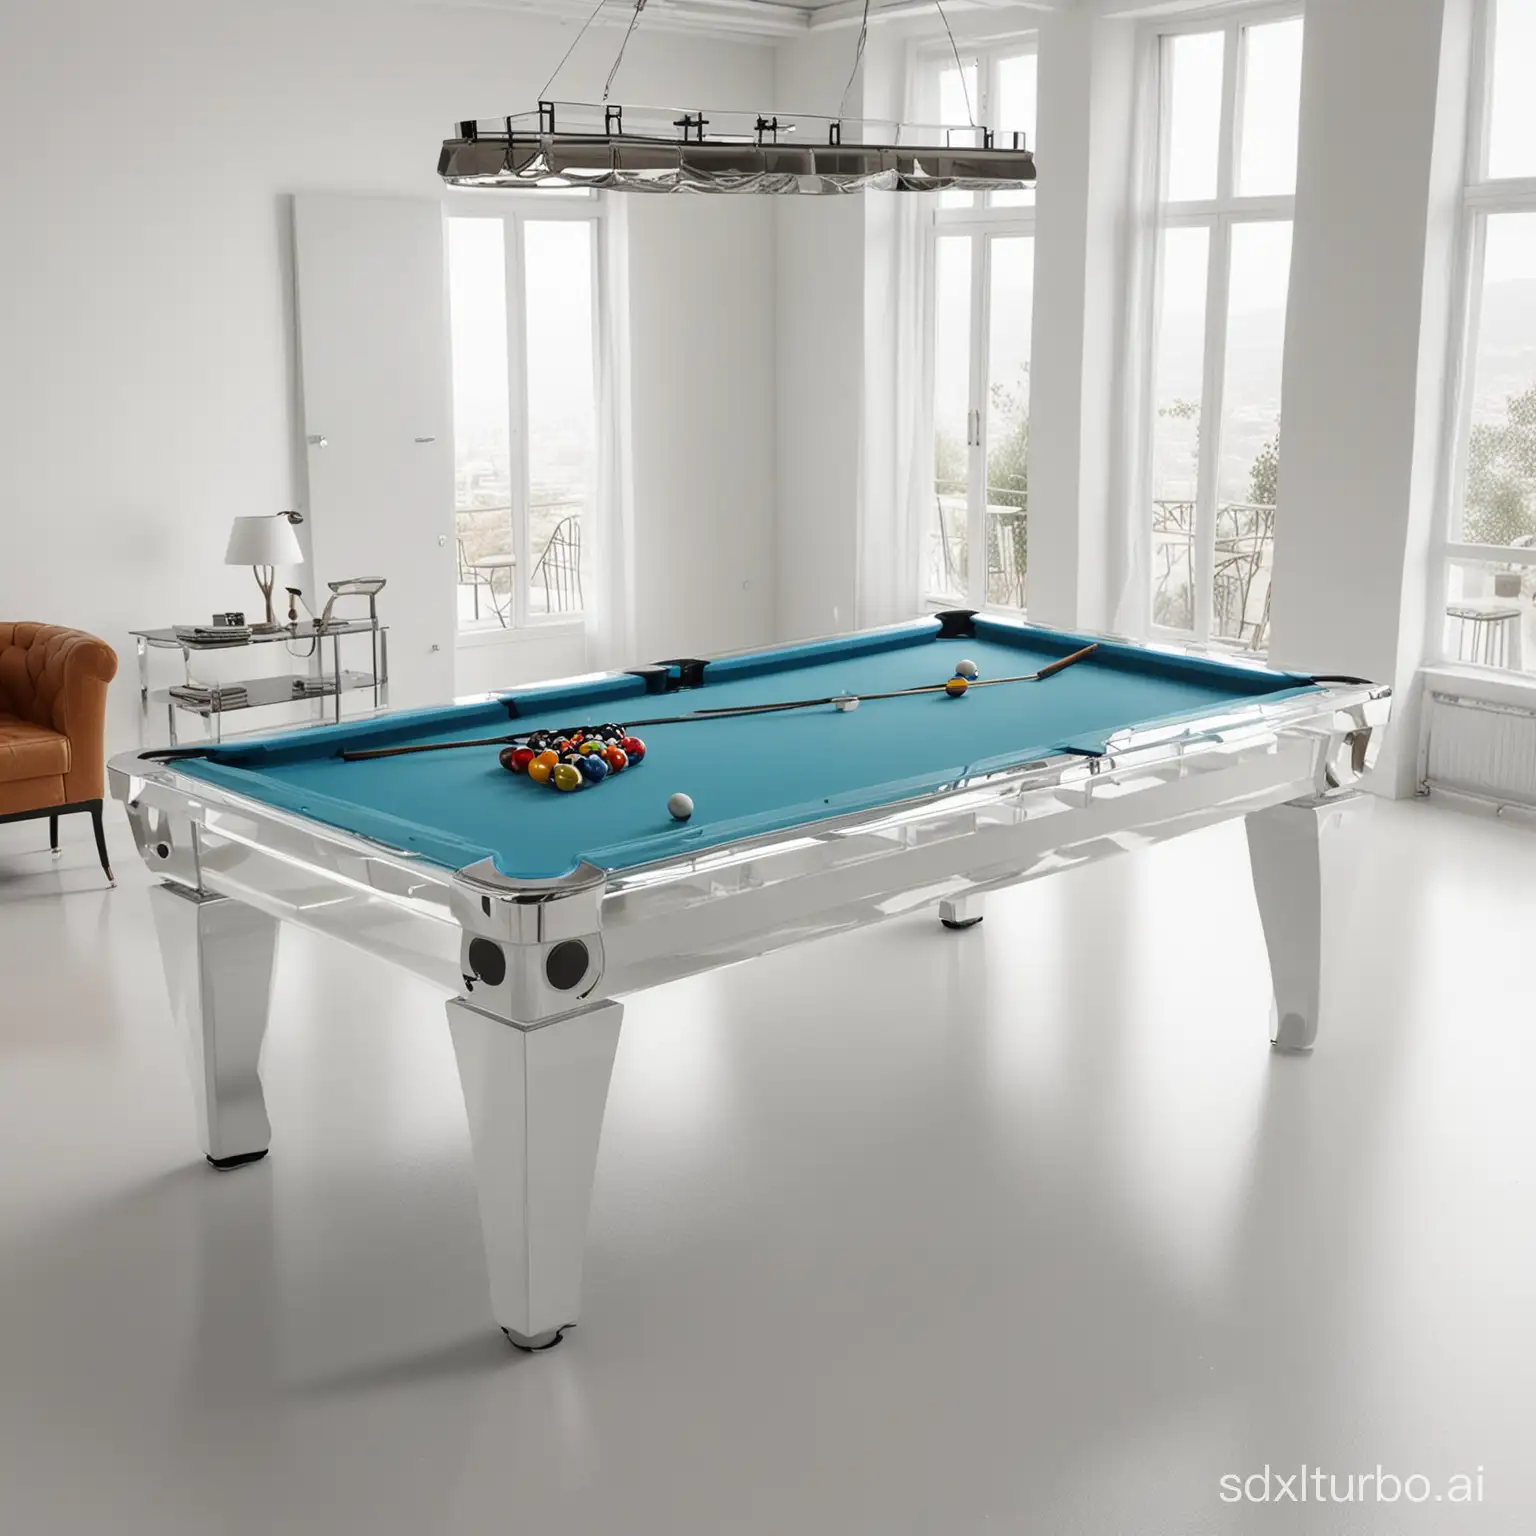 Pool table, glass pool table, Italian master style, white background, panoramic view, high definition 8K